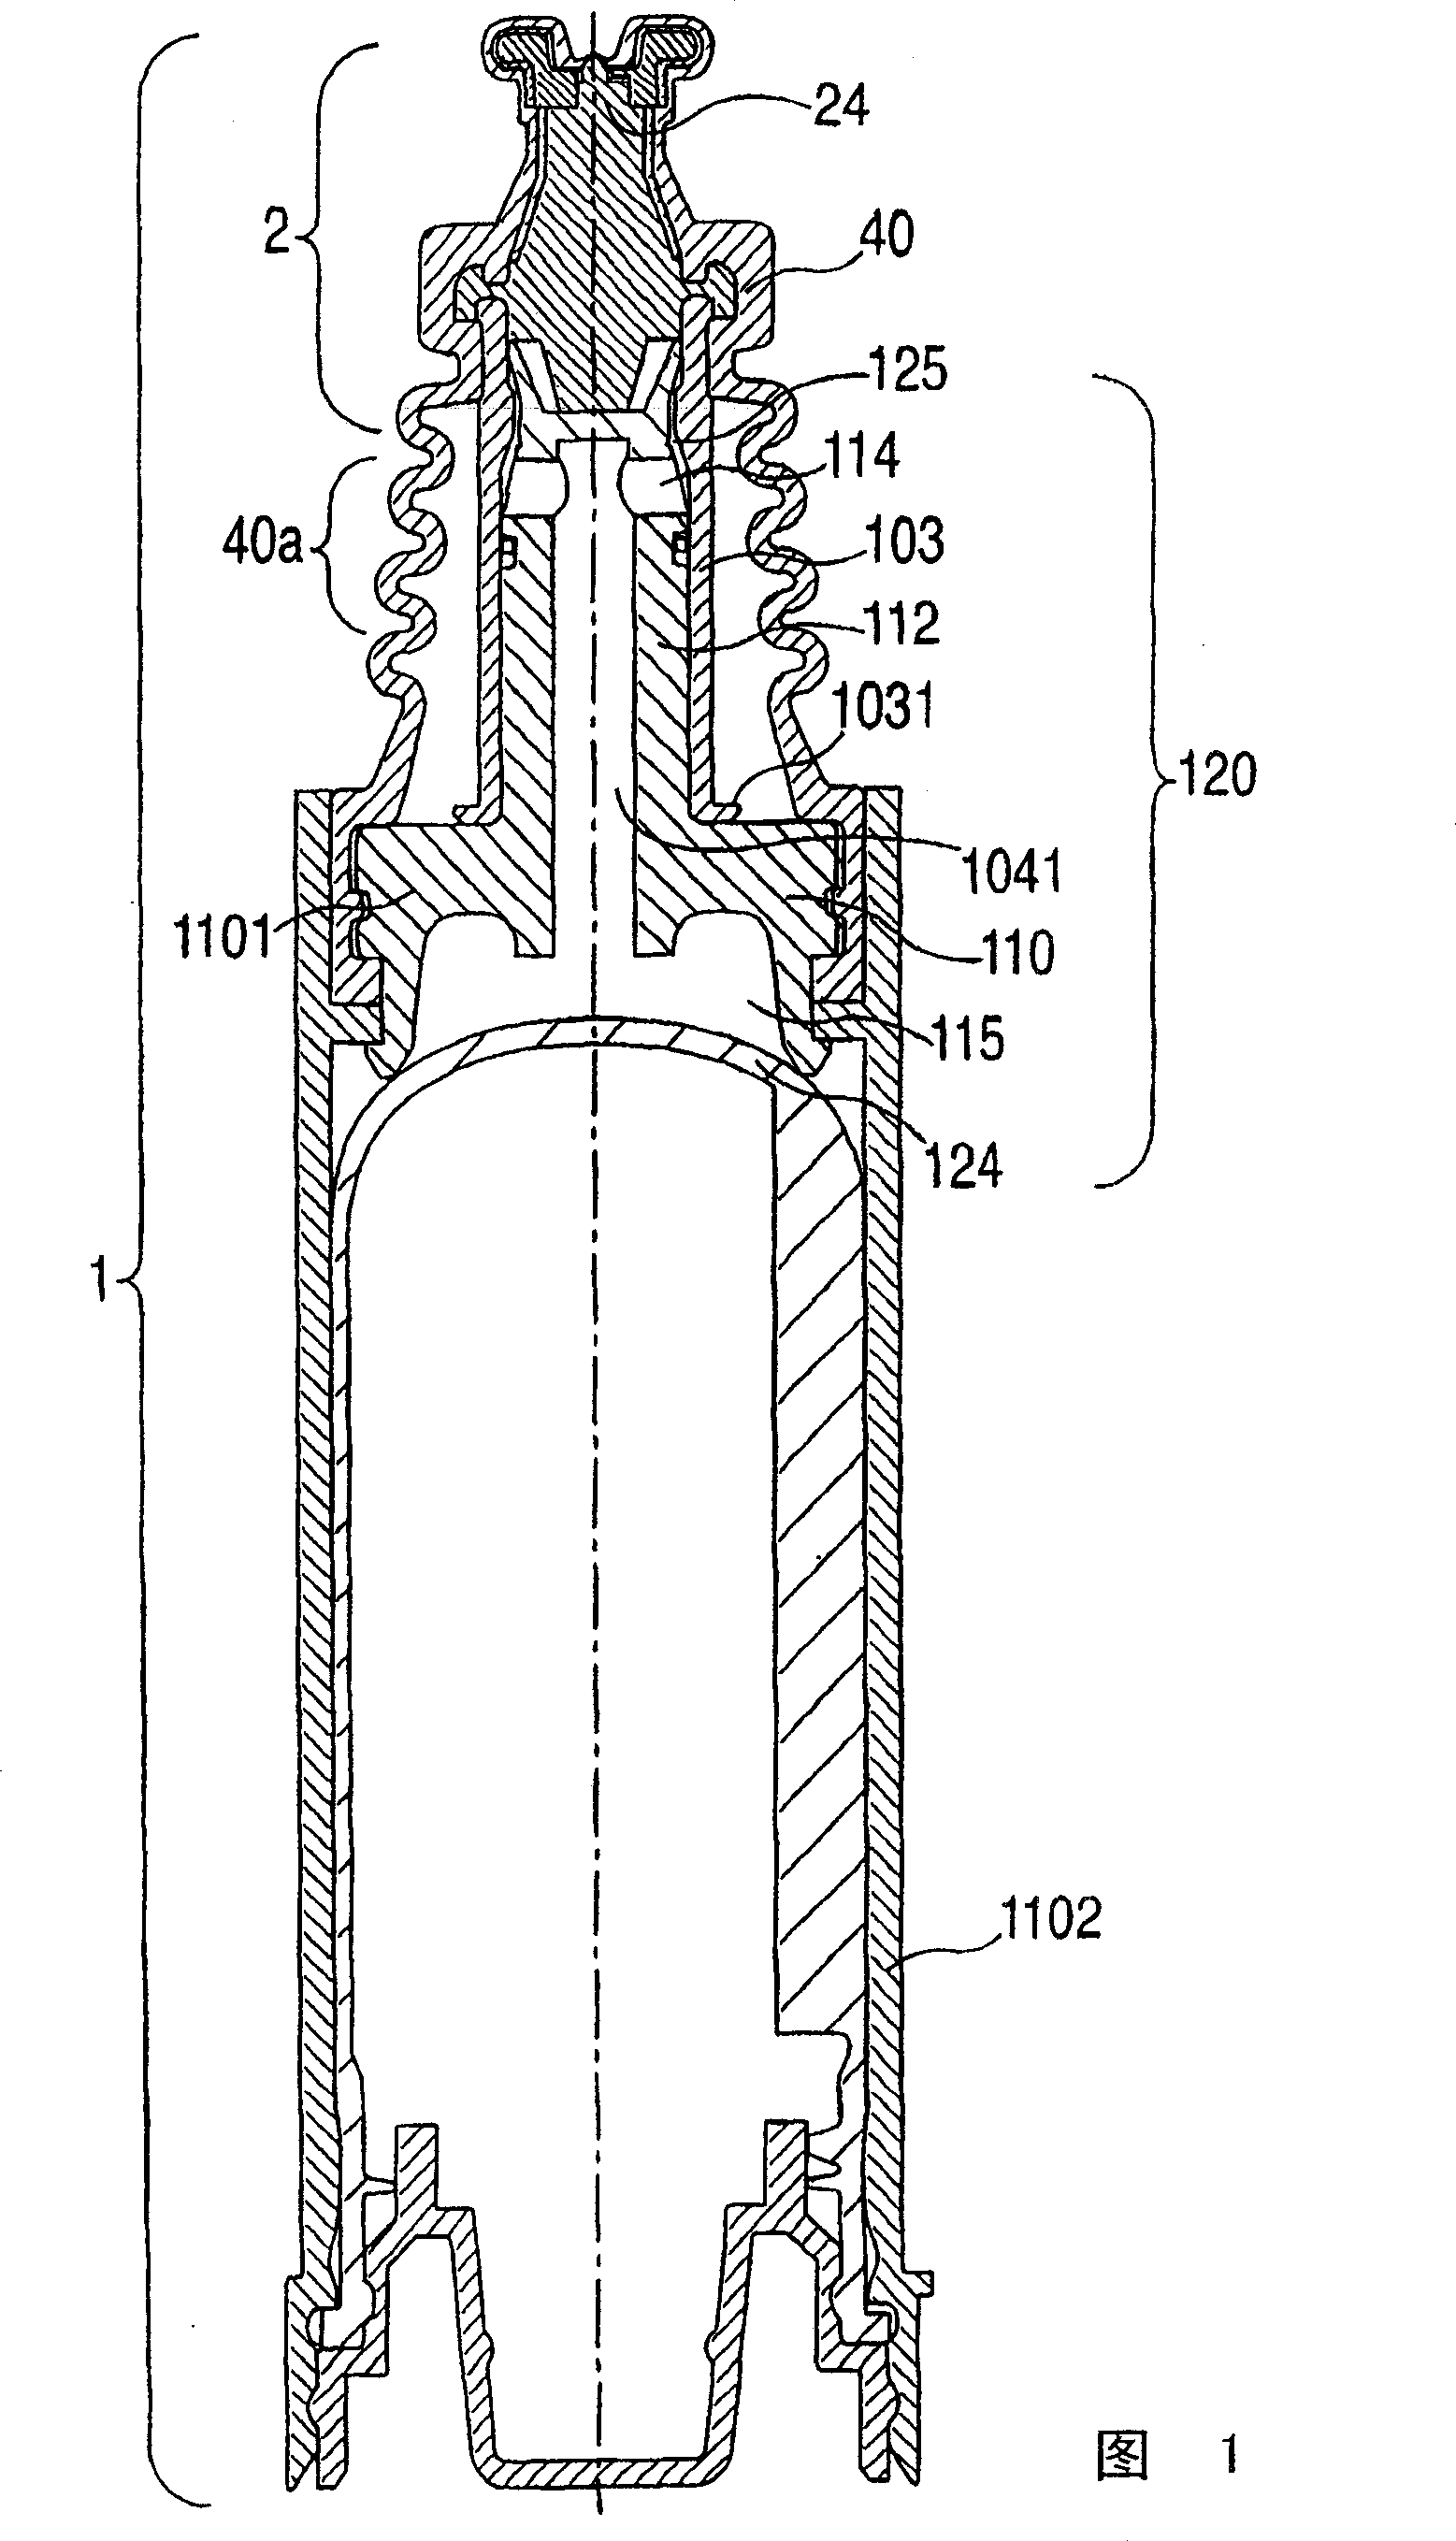 System and method for a two piece spray nozzle